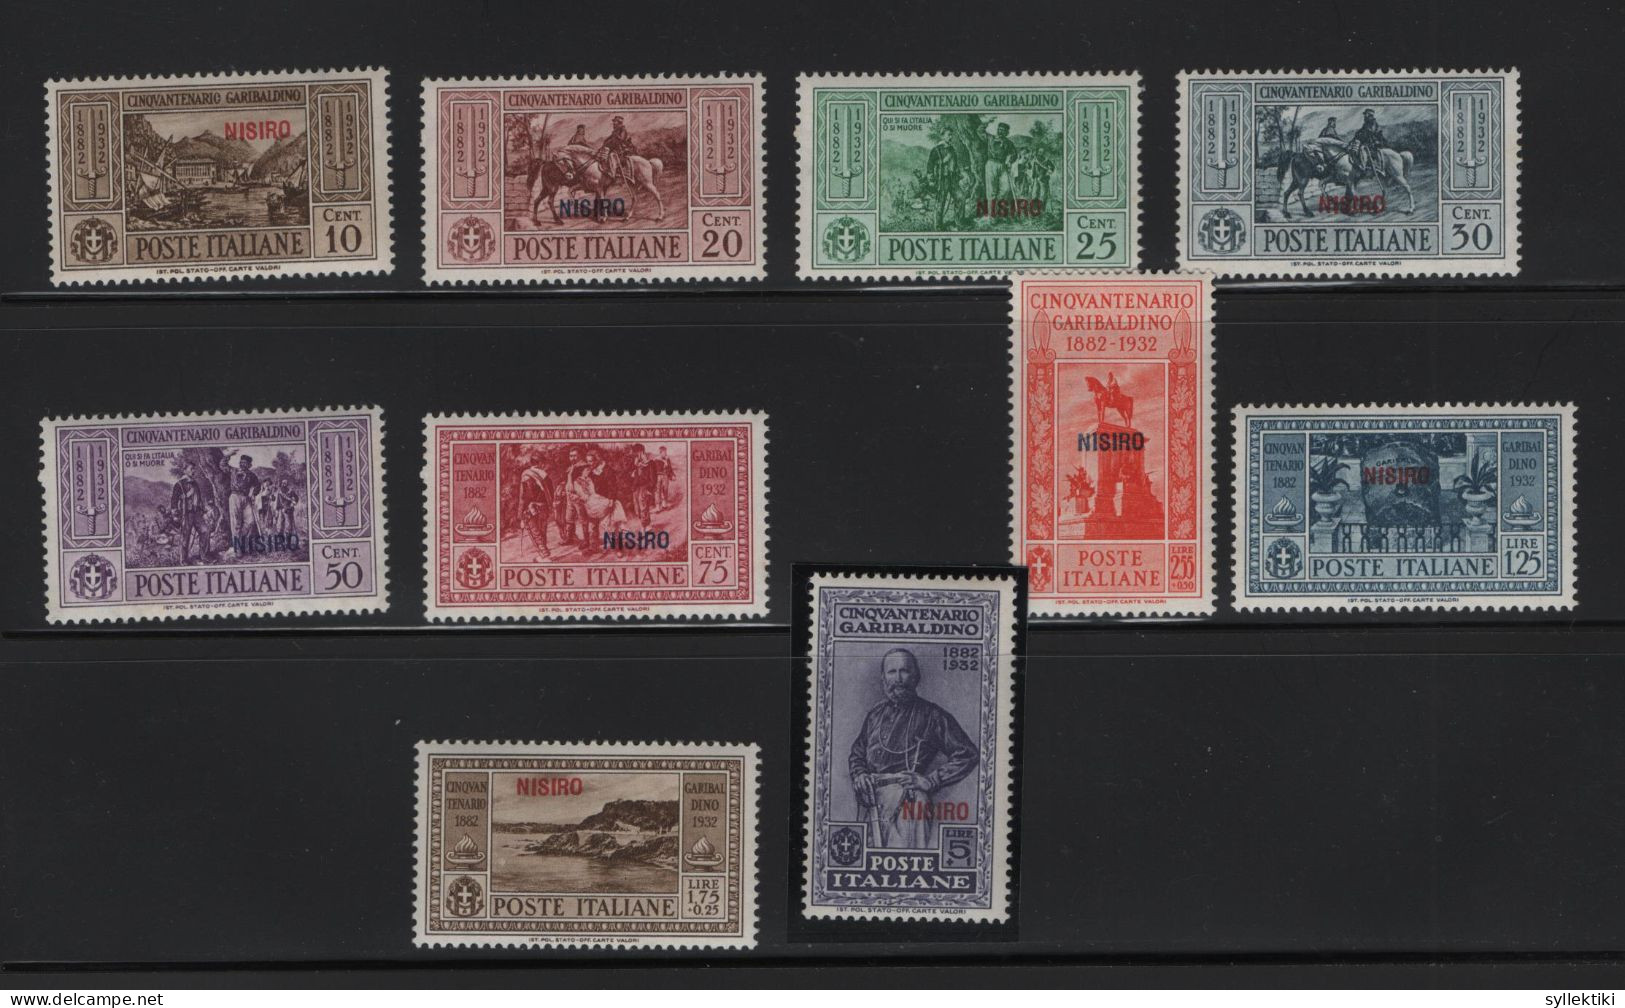 GREECE 1932 DODECANESE GARIBALDI ISSUE NISIRO OVERPRINT COMPLETE SET MNH STAMPS   HELLAS No 108X - 117X AND VALUE EURO - Dodecaneso